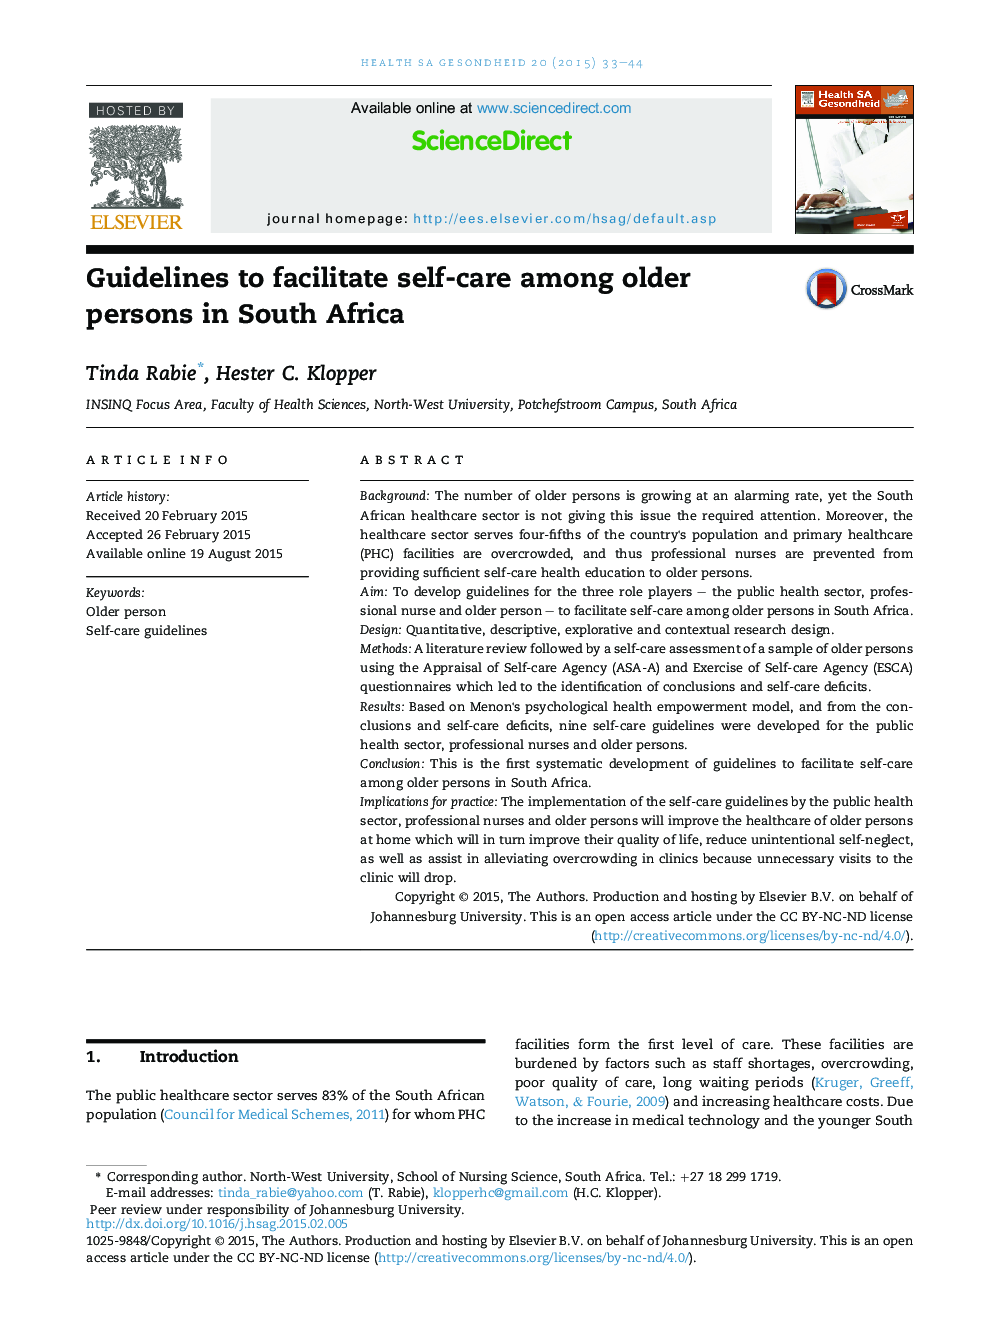 Guidelines to facilitate self-care among older persons in South Africa 